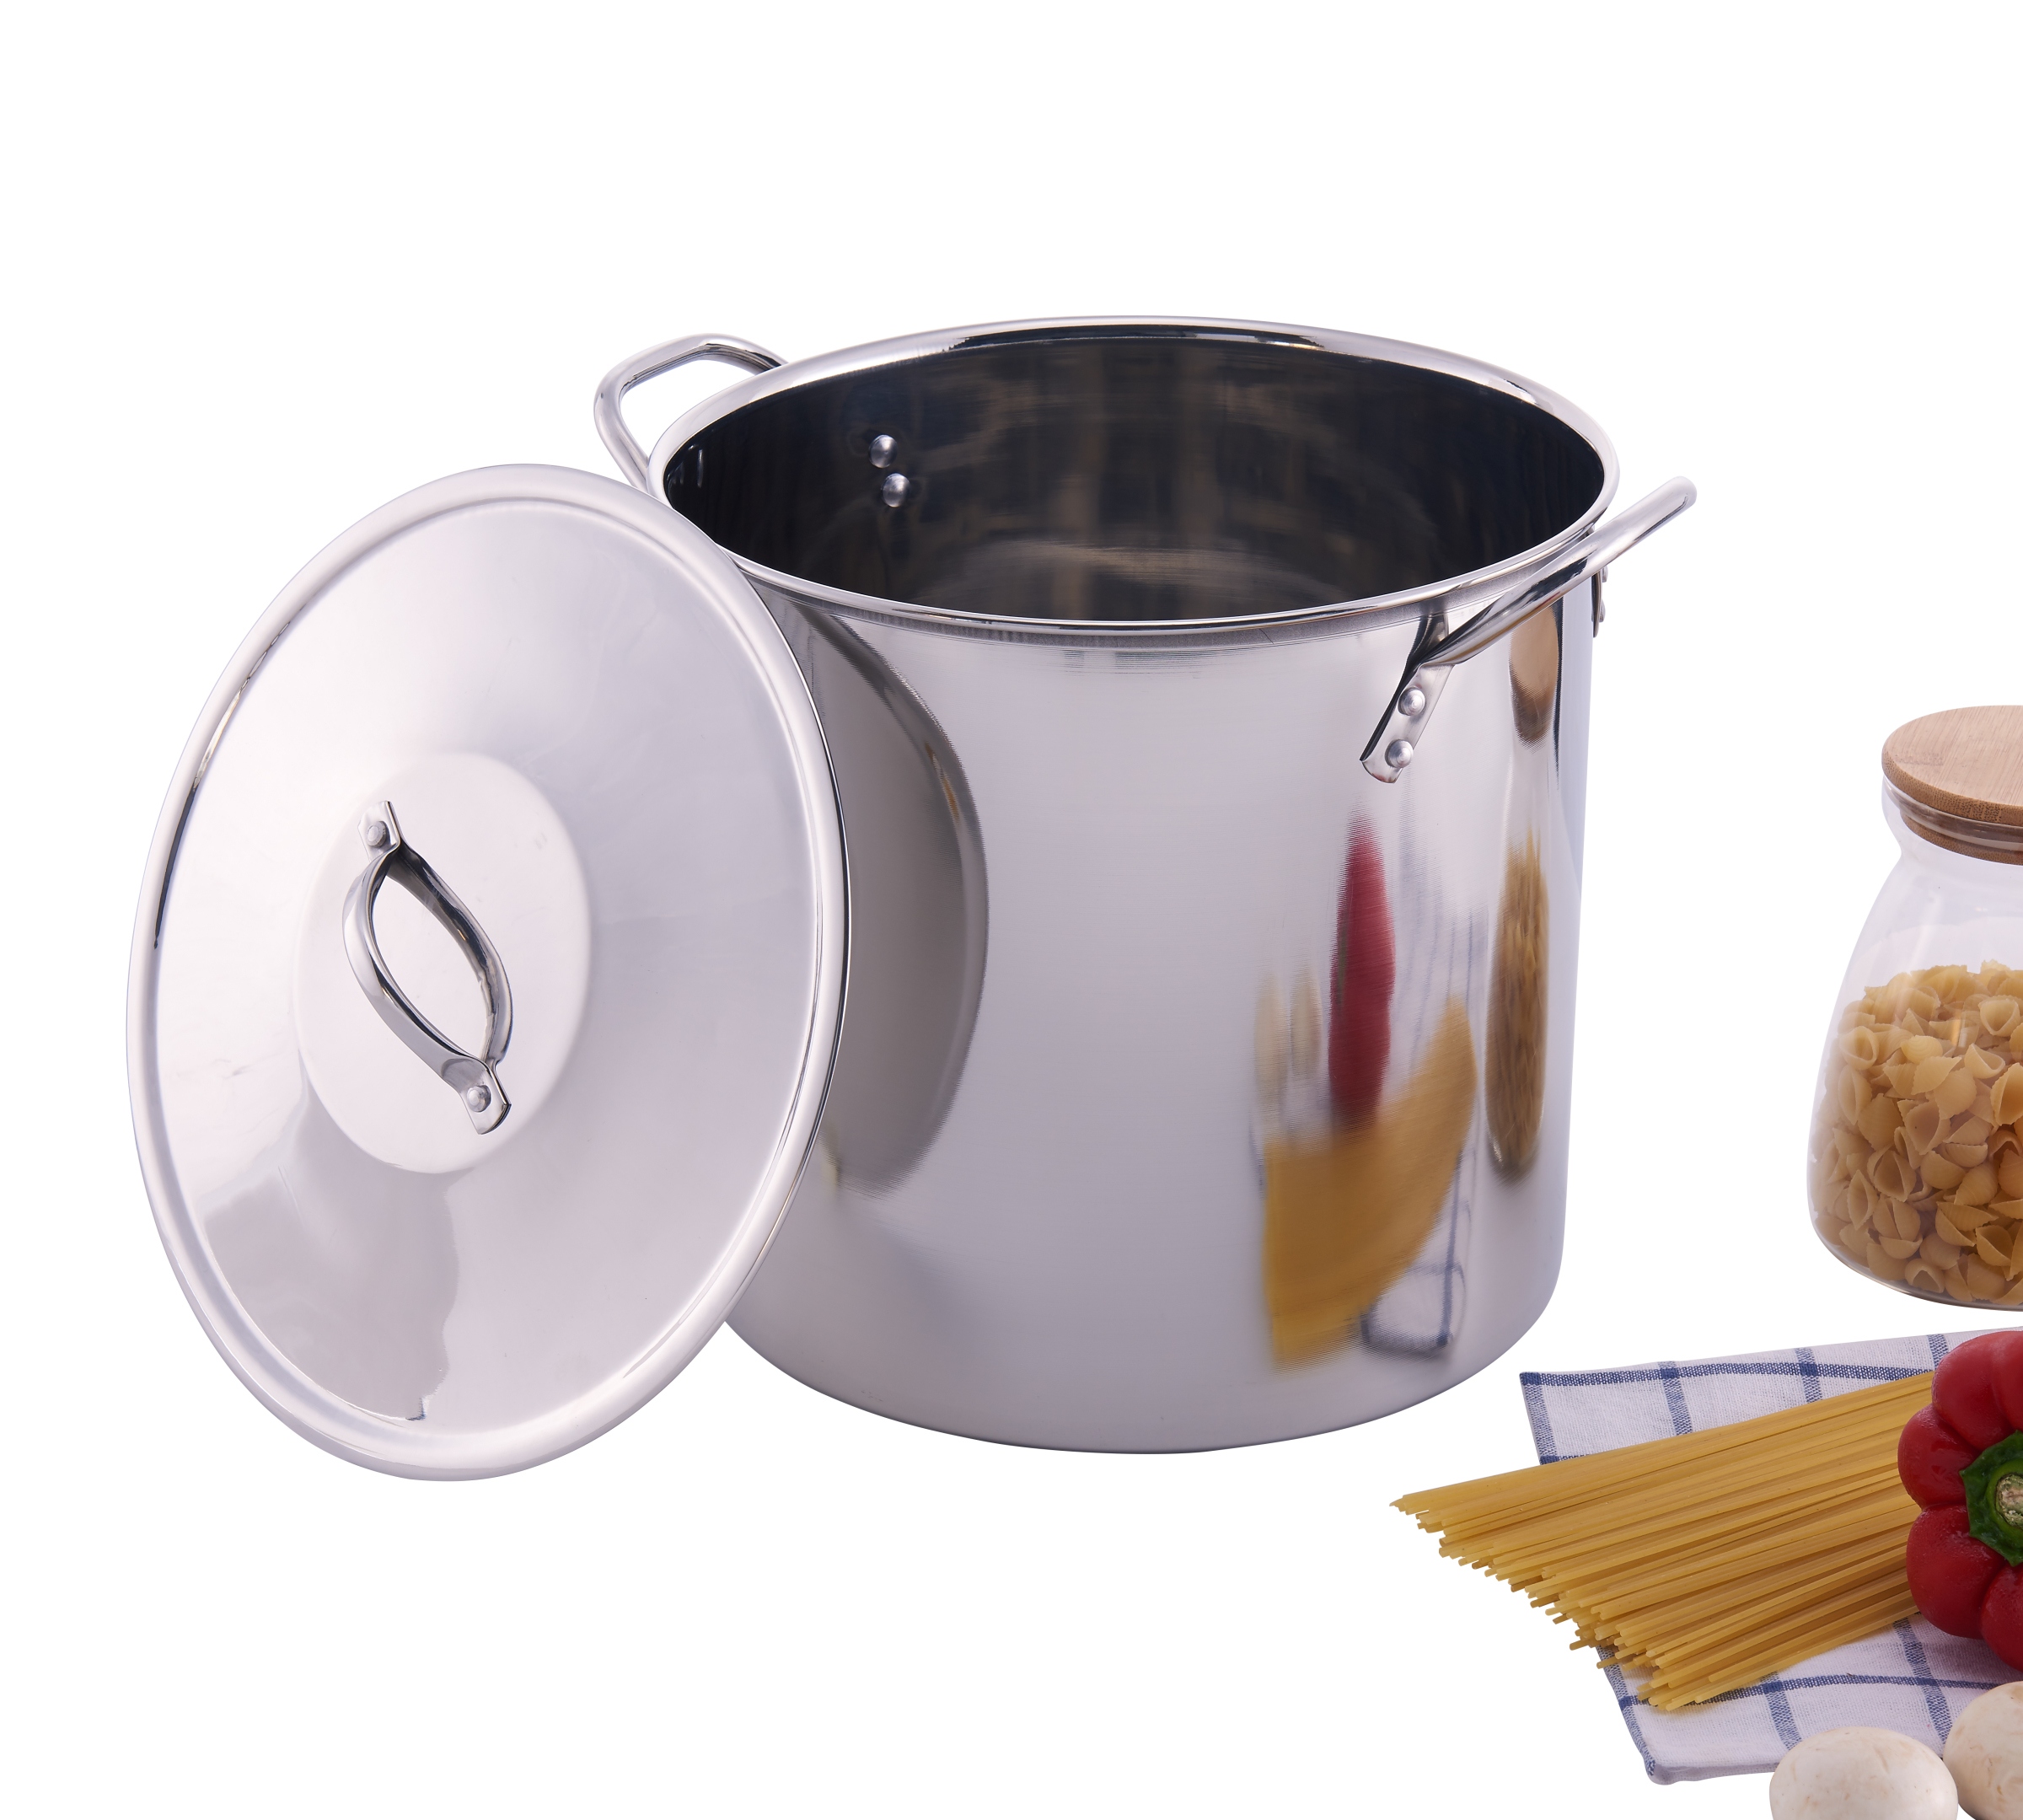 Mainstays 16-Qt Stainless Steel Stock Pot with Metal Lid - image 4 of 4